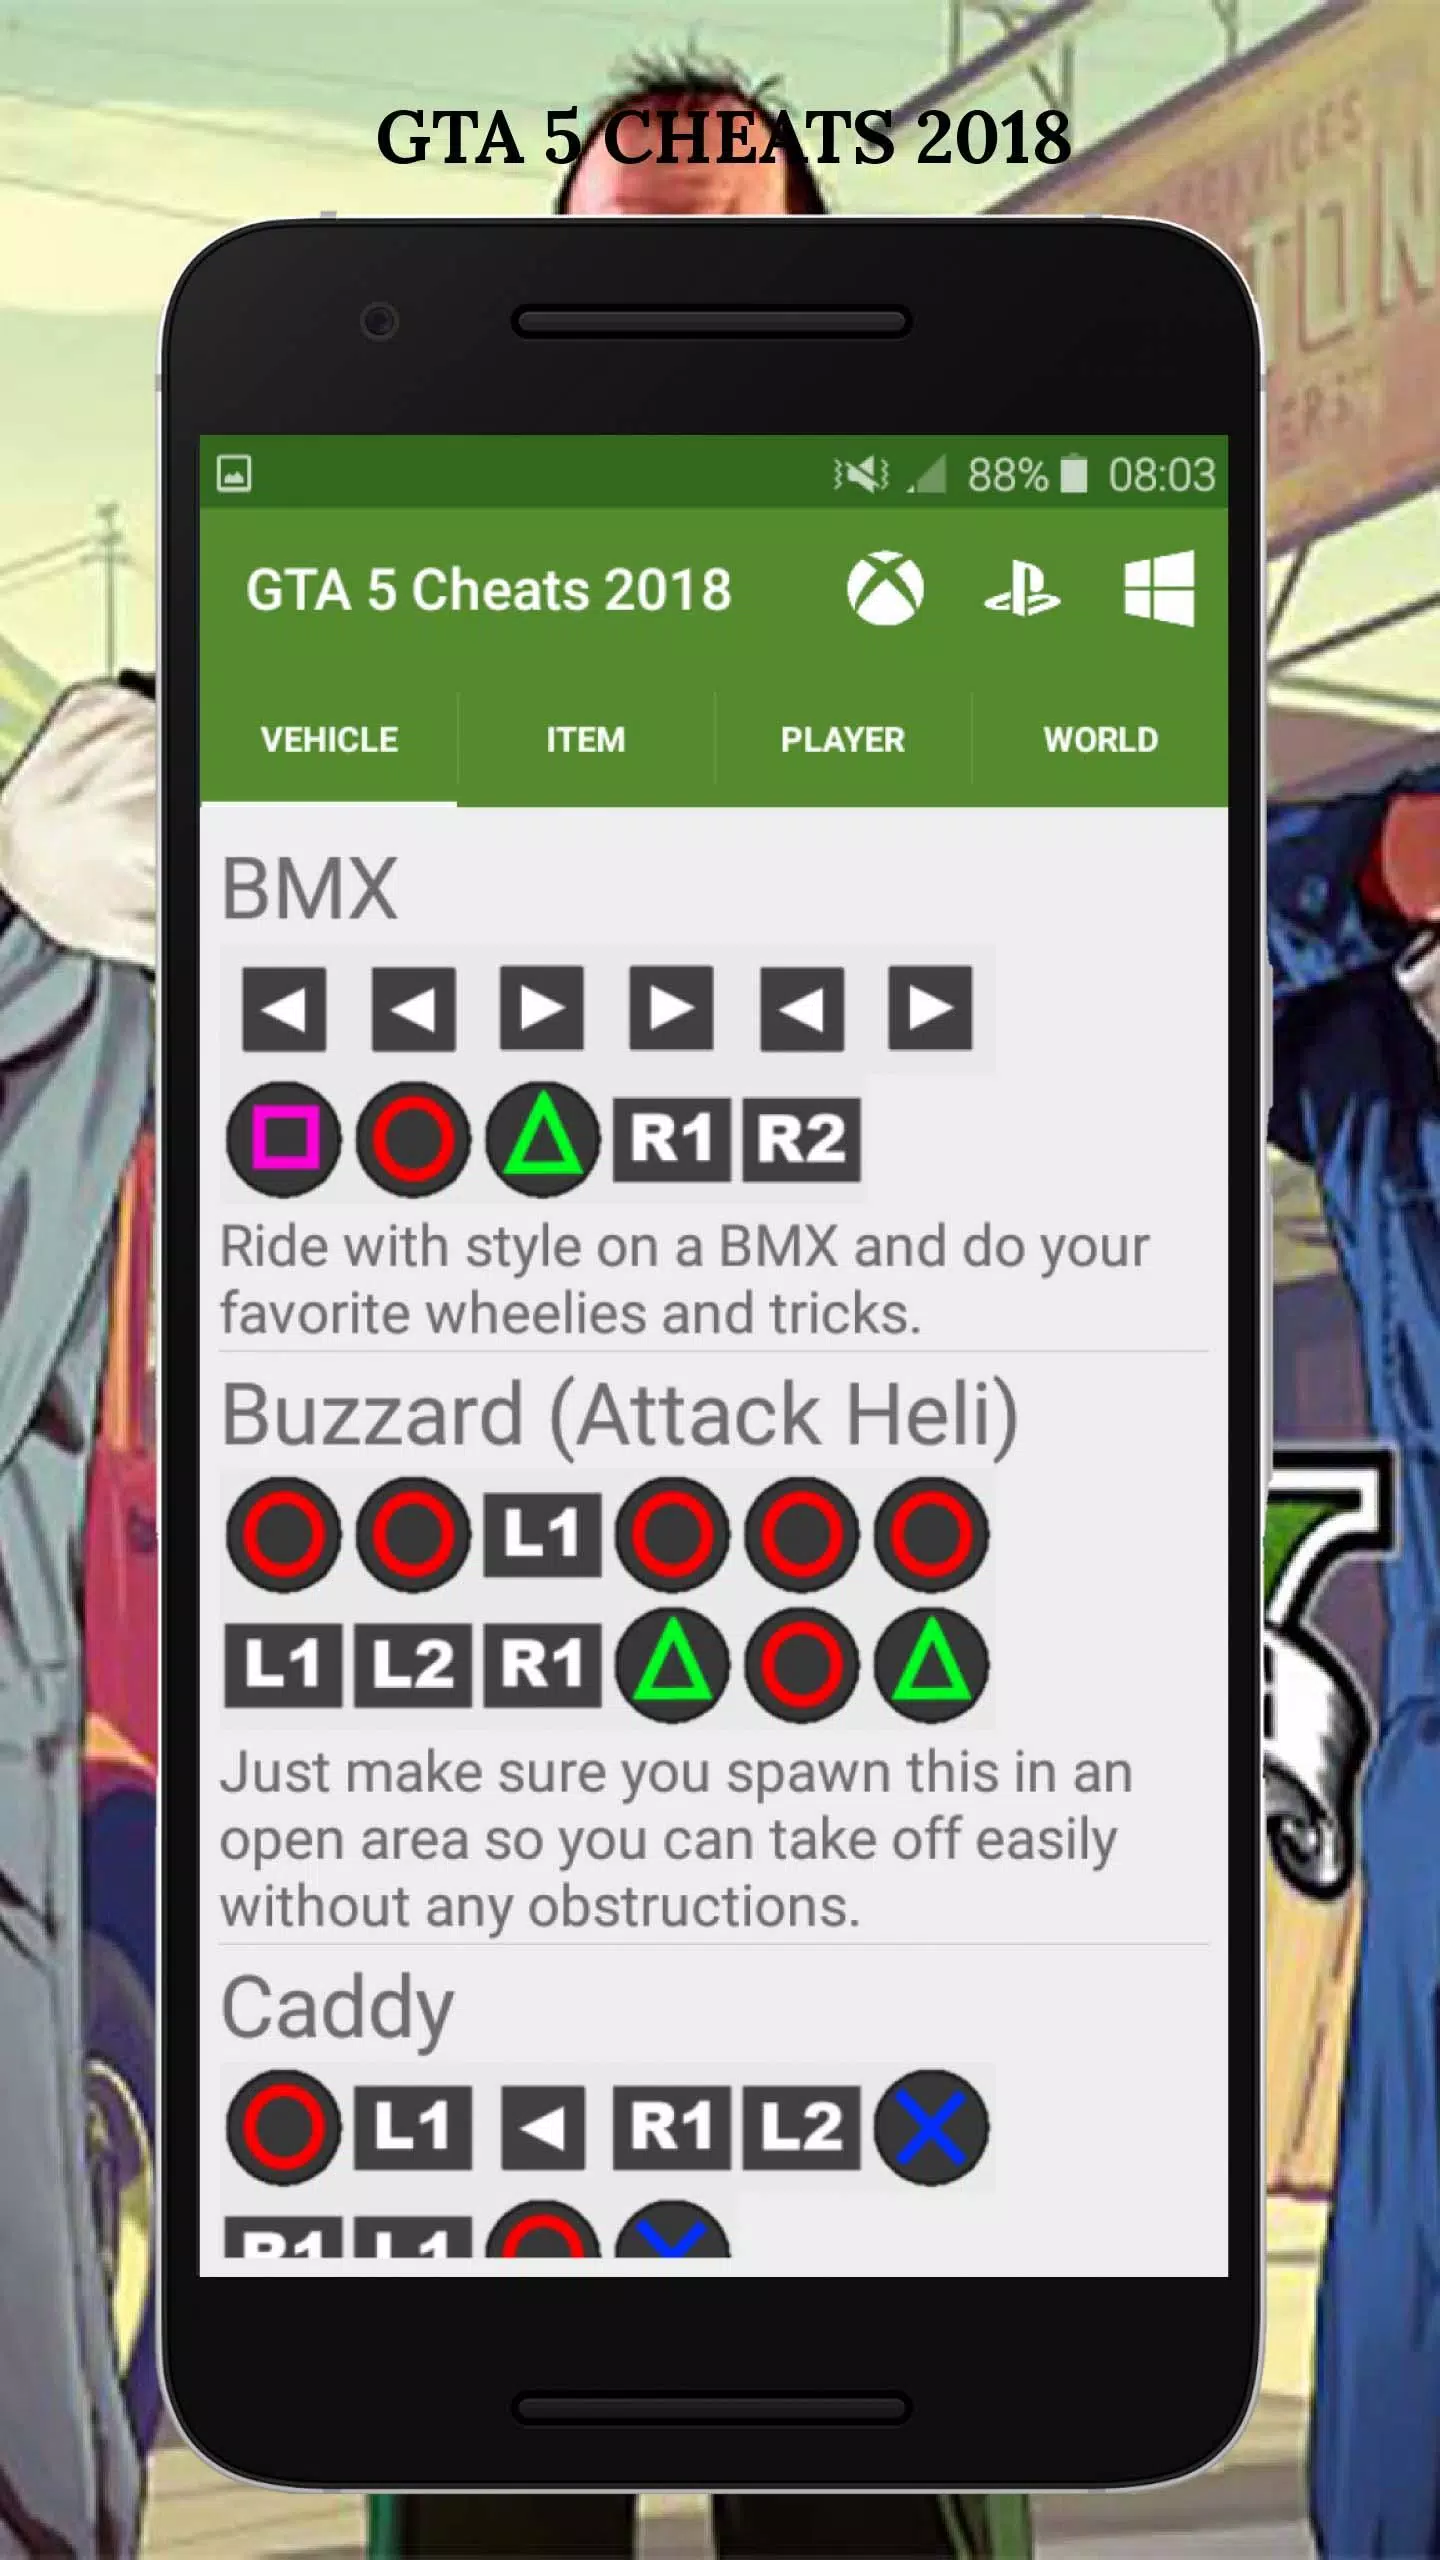 GTA 5 Cheats 2018 for Android - APK Download